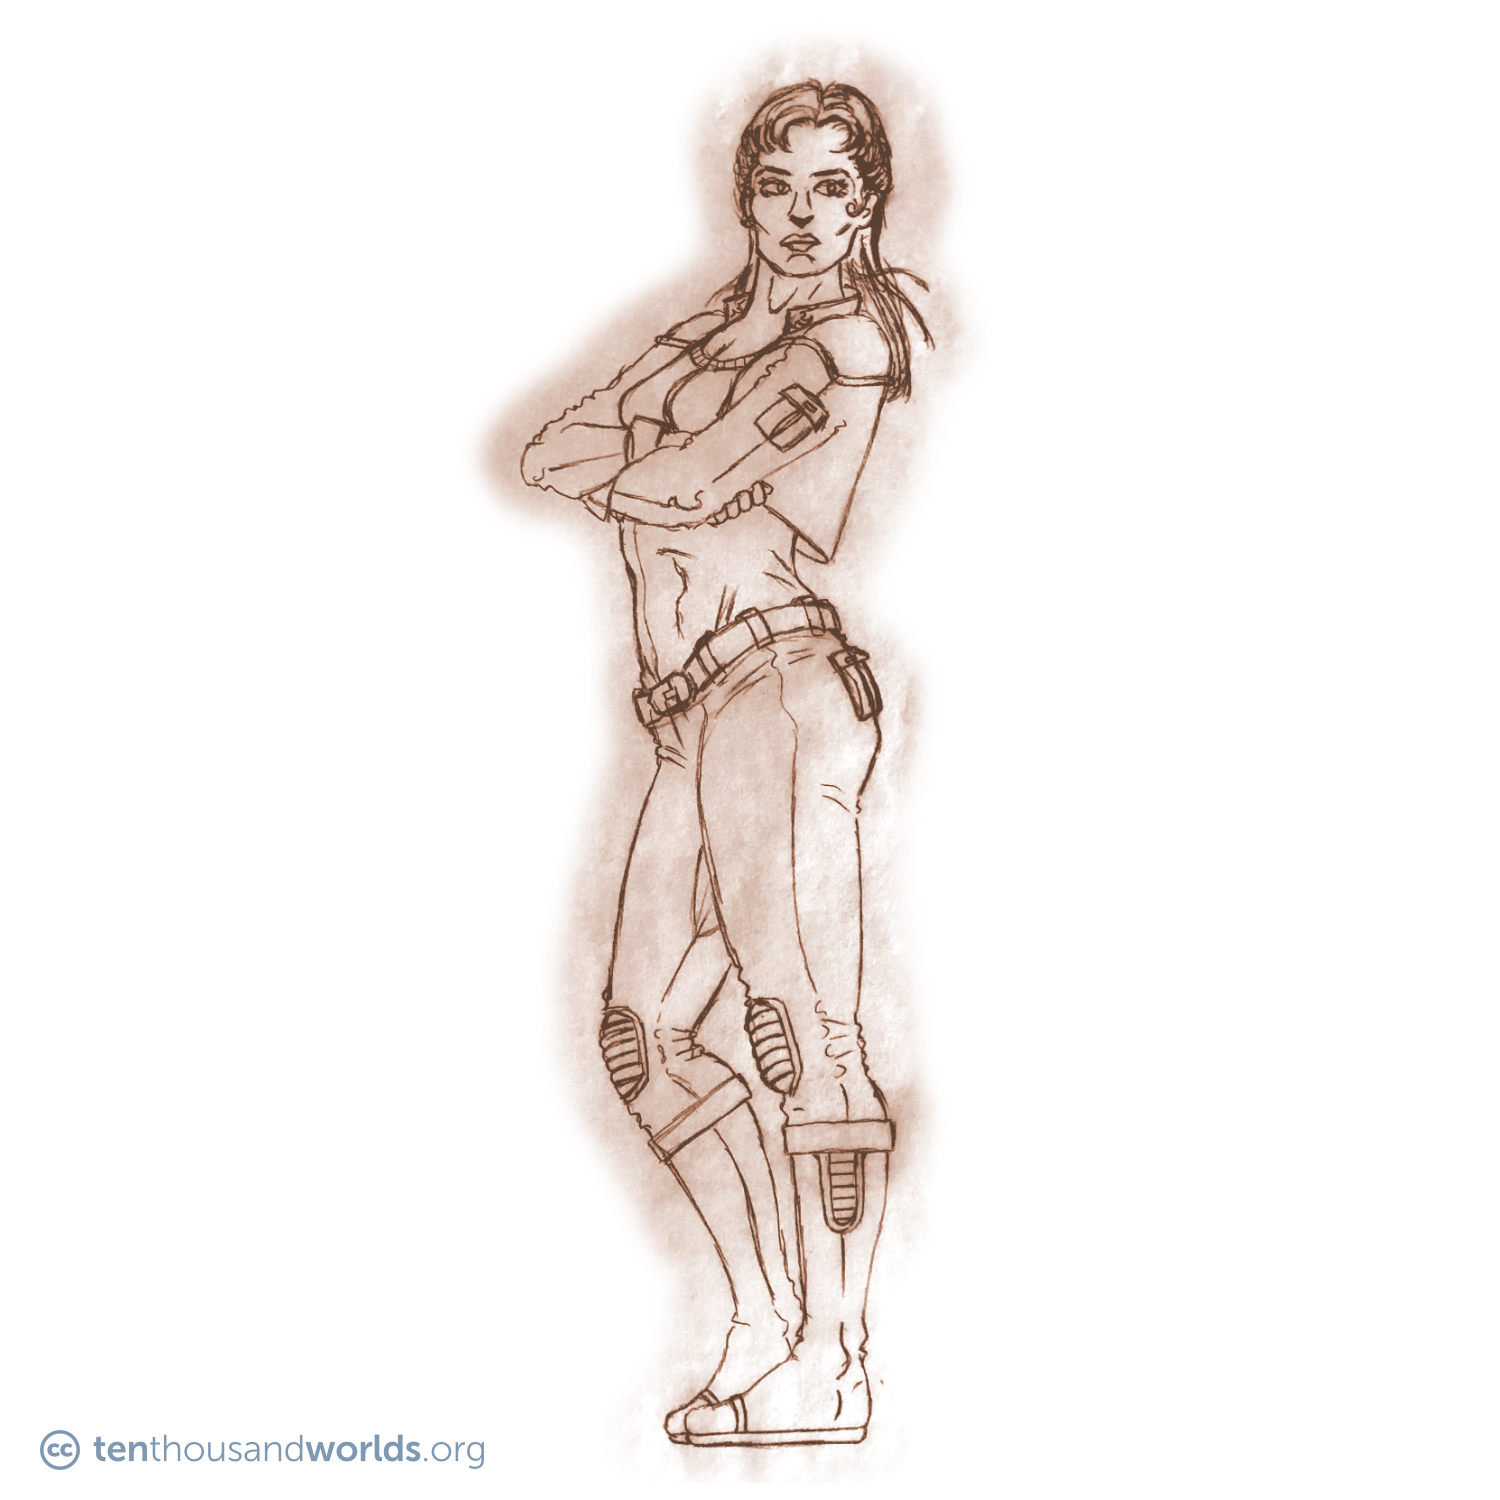 A pencil sketch of a woman in a futuristic pilot’s uniform standing with crossed arms.